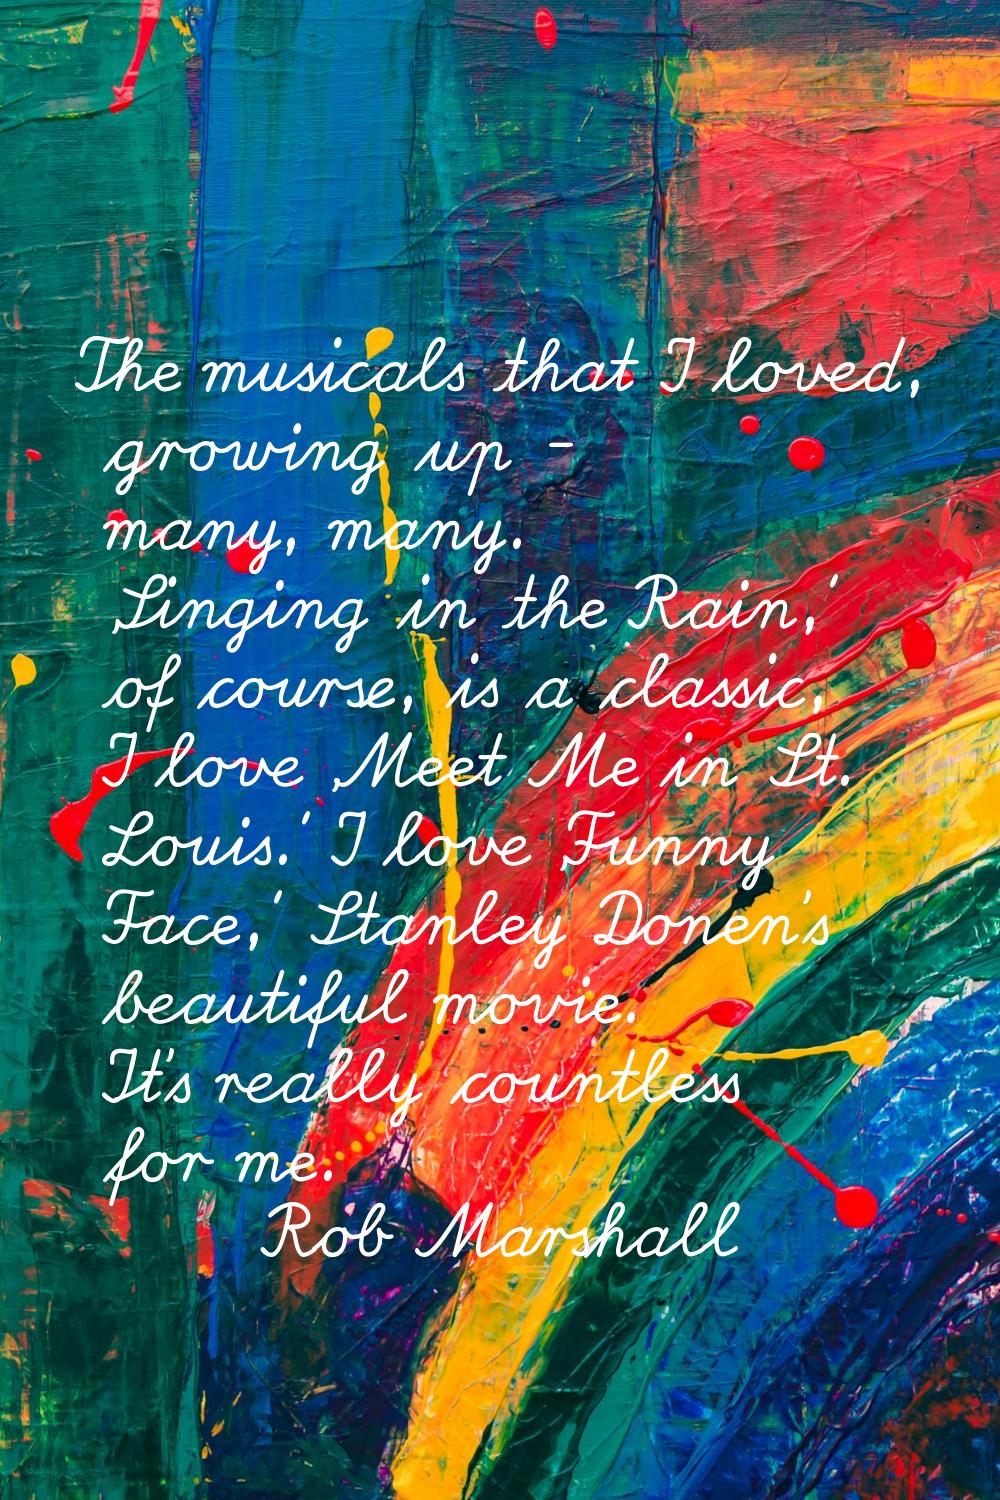 The musicals that I loved, growing up - many, many. 'Singing in the Rain,' of course, is a classic,